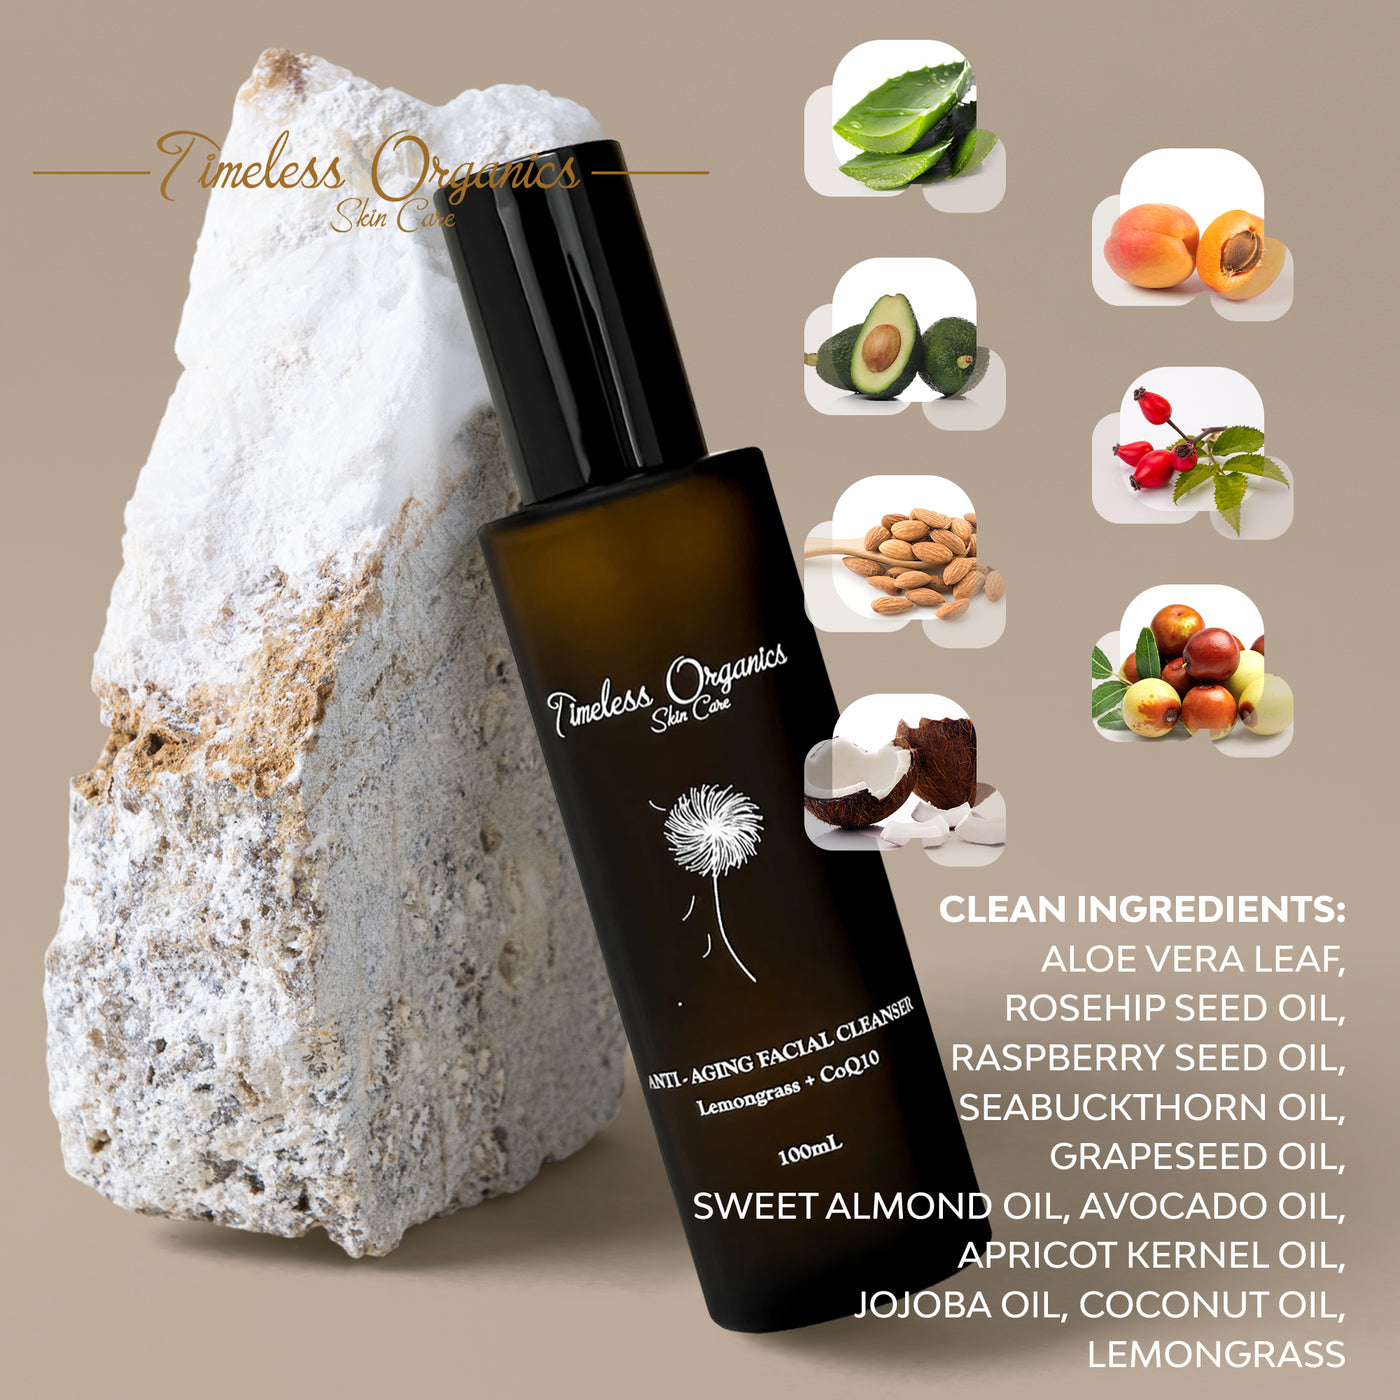 Anti-Aging Facial Cleanser